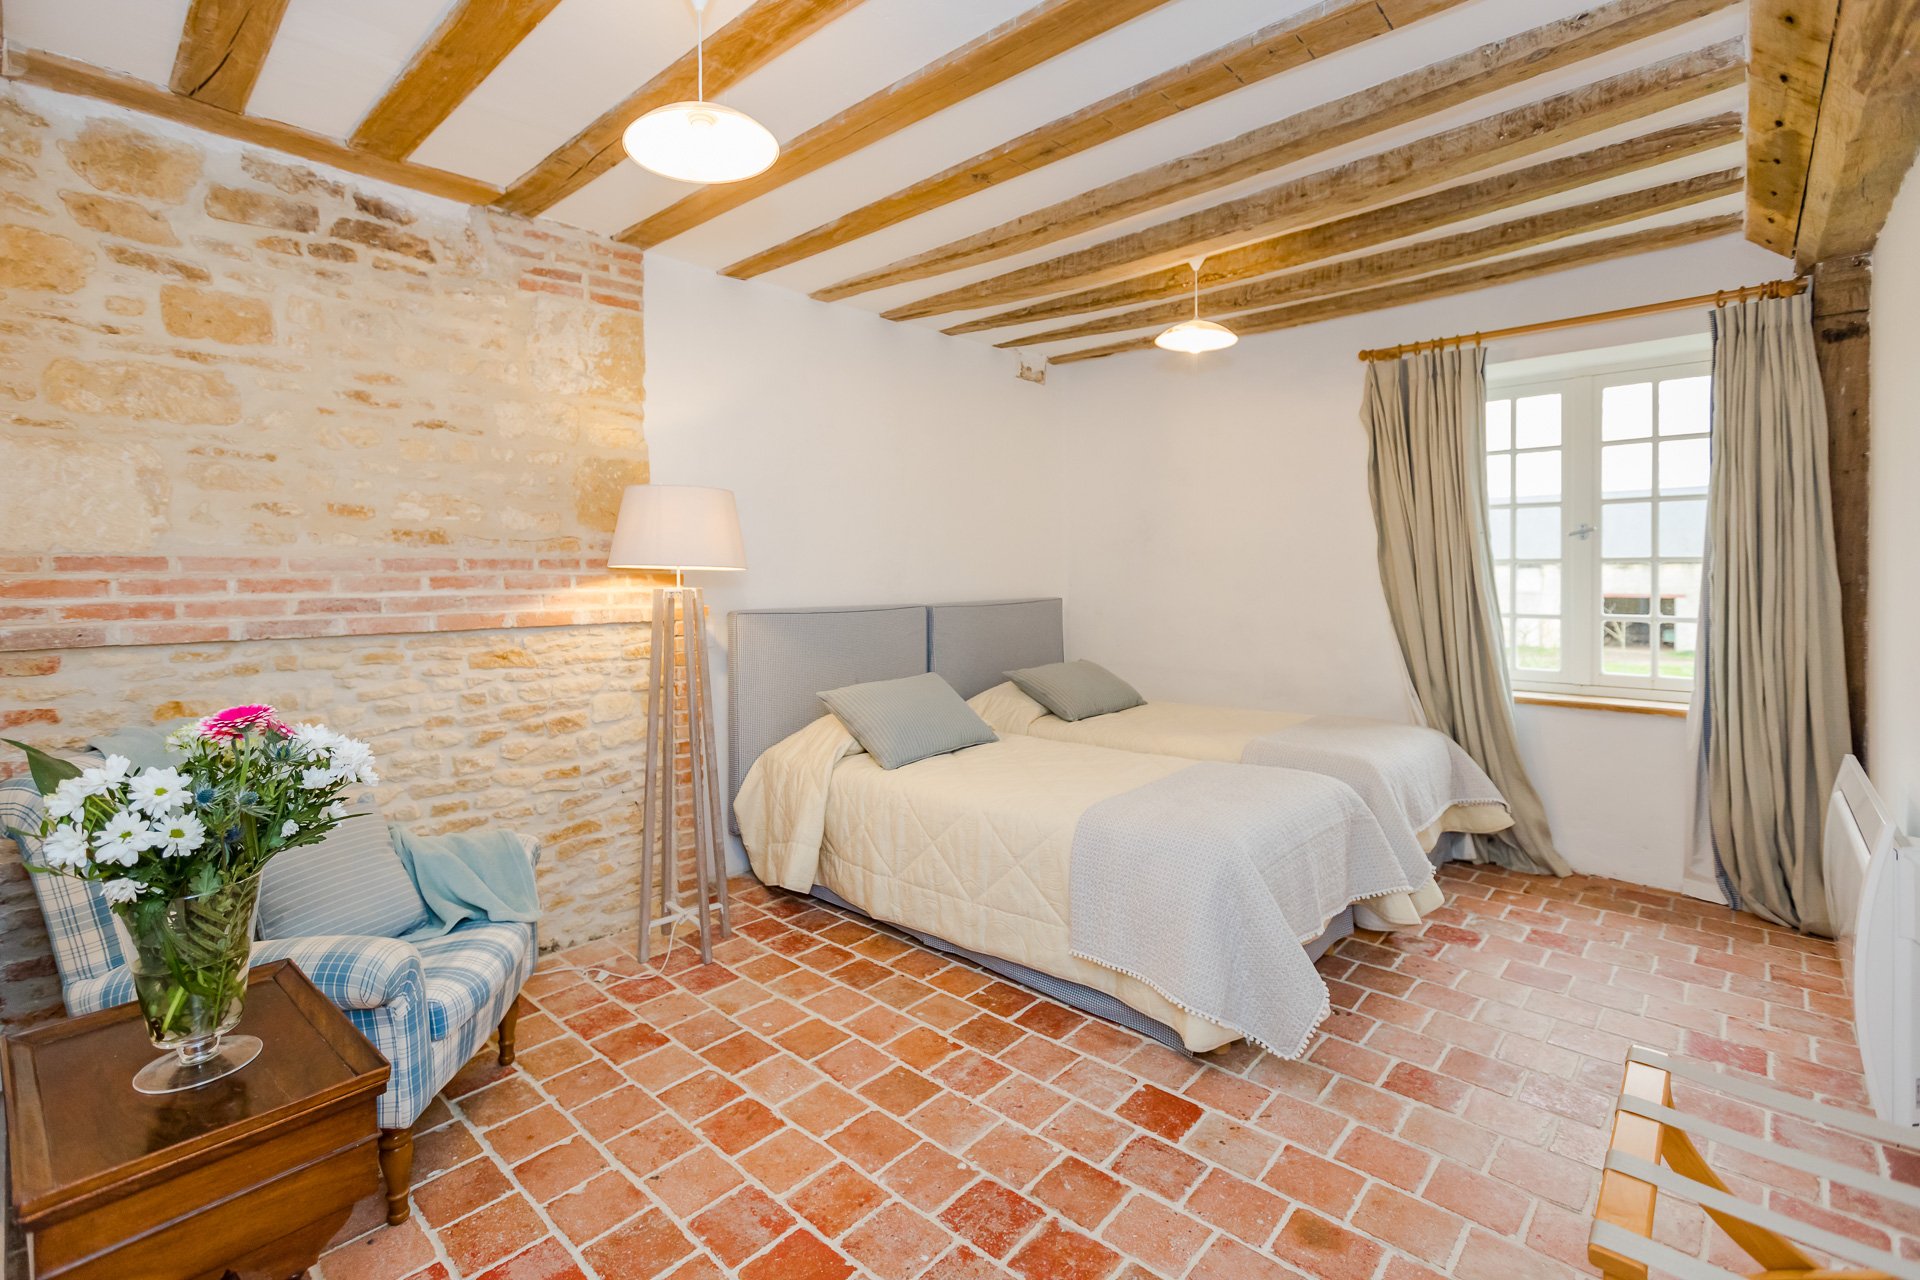 A bedroom with wooden beams and tiled floors available for rent in a French chateau near Paris.